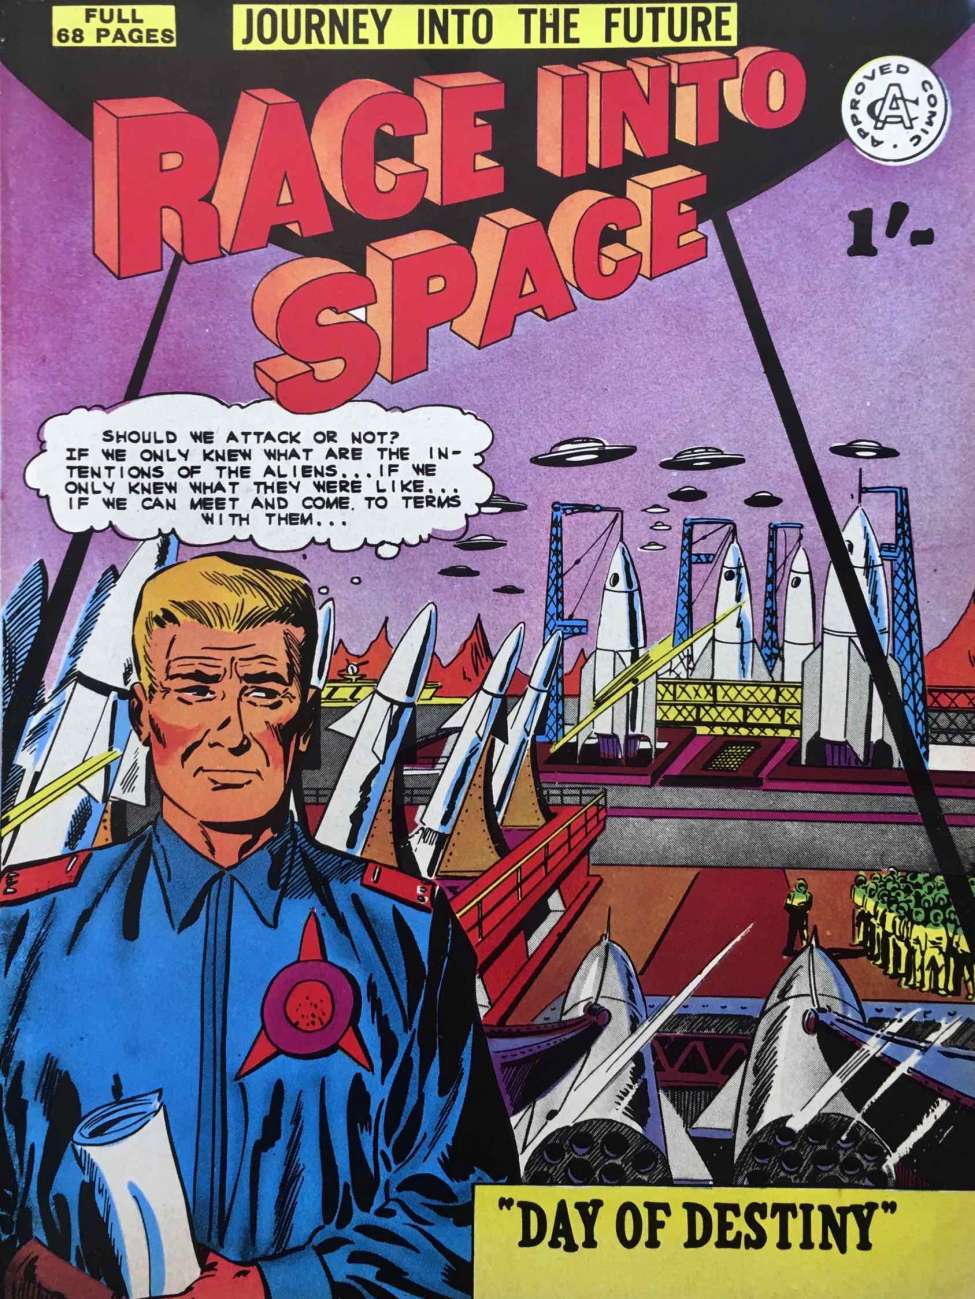 Book Cover For Race into Space 1